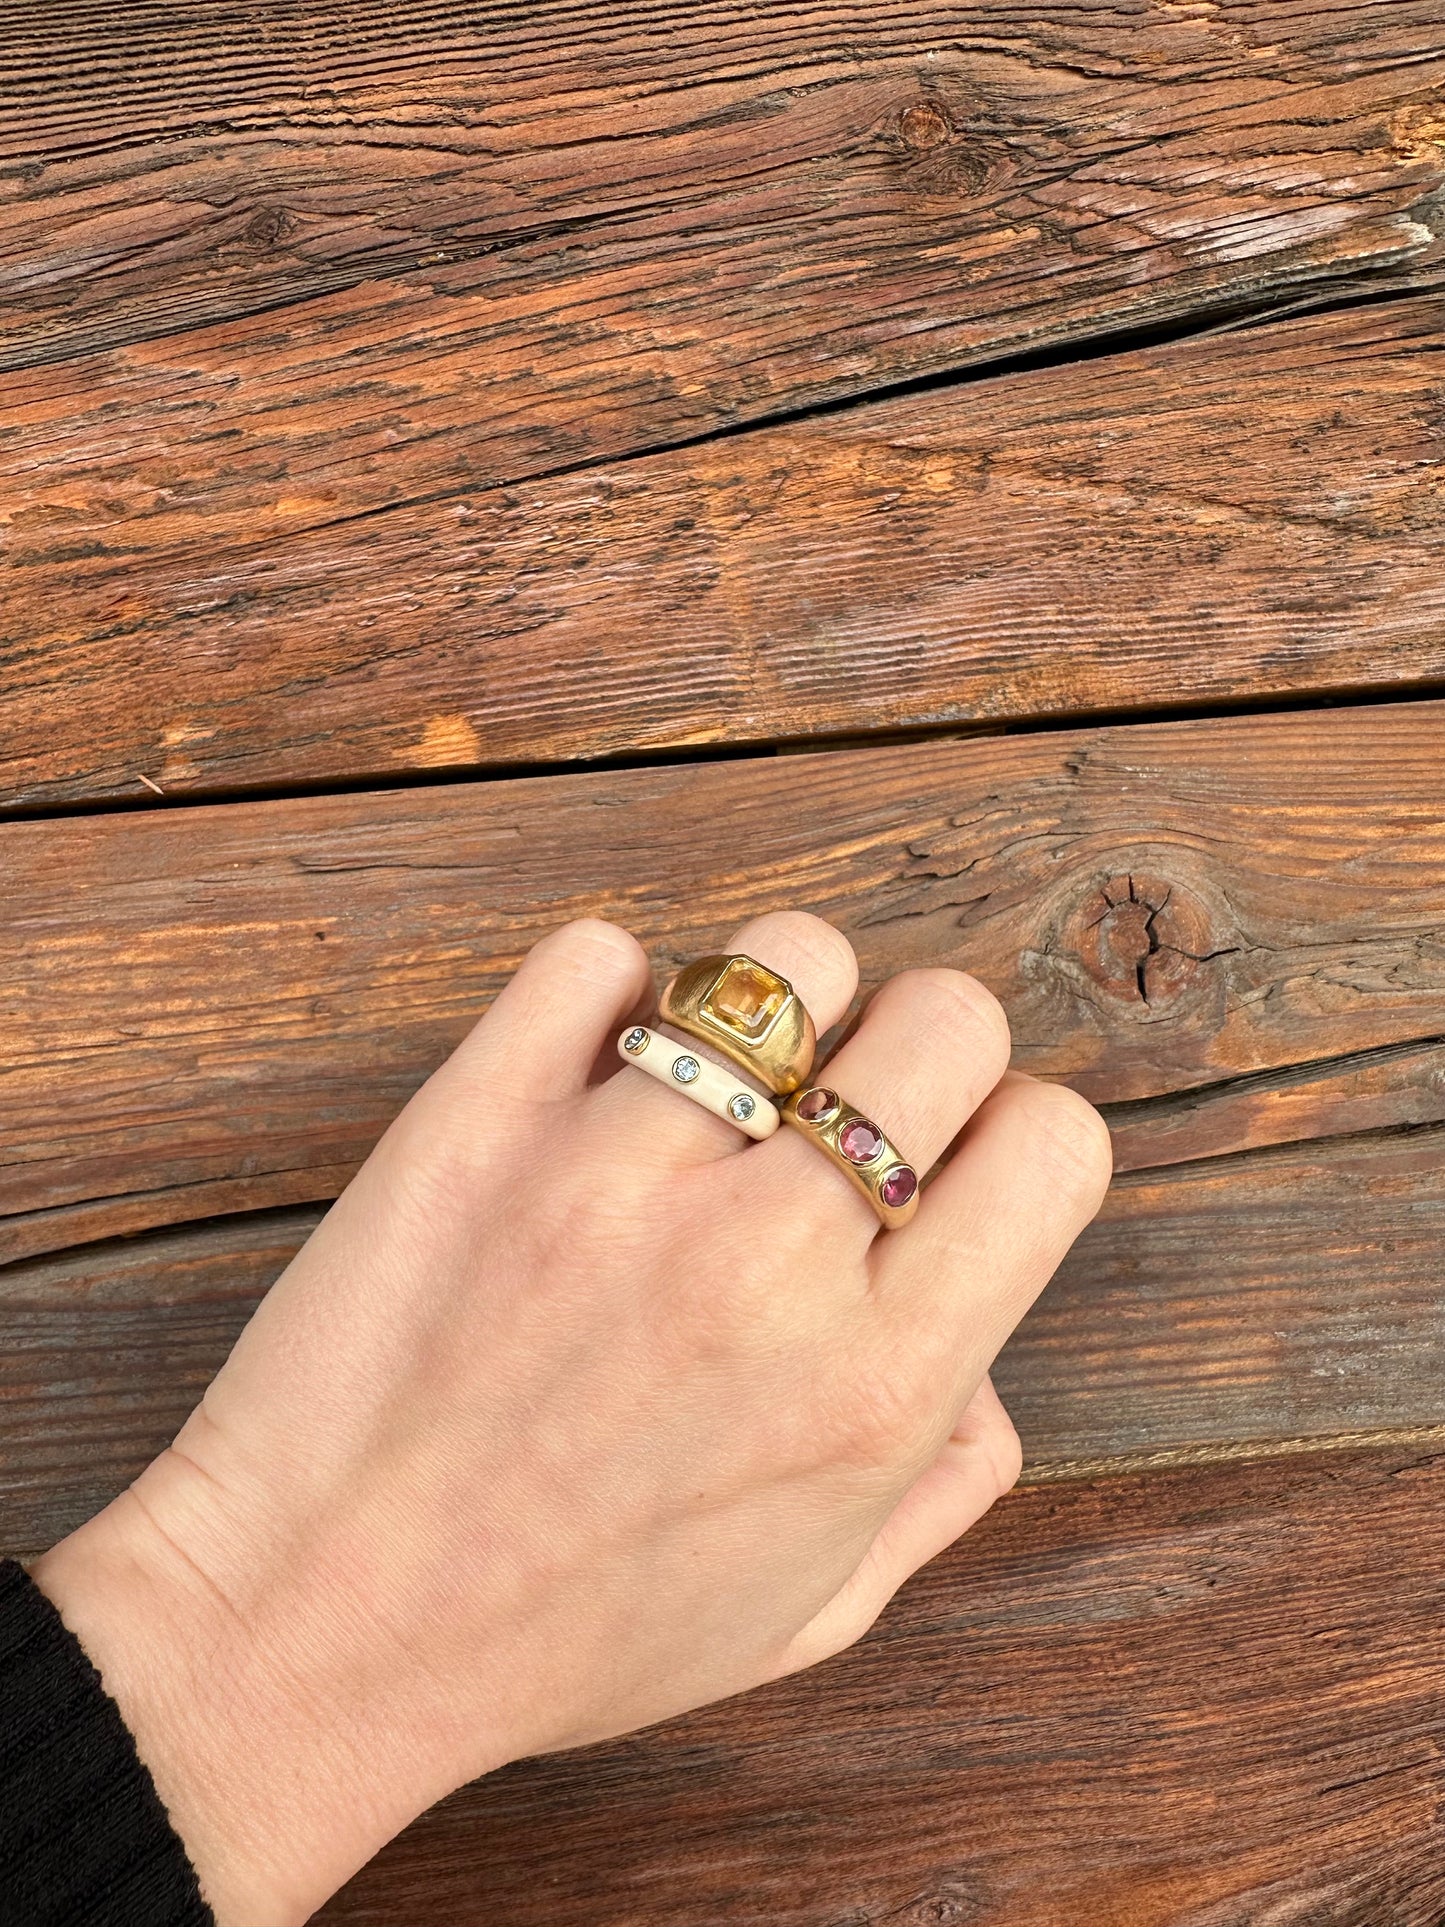 Kaja Erika Jorgensen 18k gold Rings, Uno Ring in combination with Wooly Ring and Octo Ring